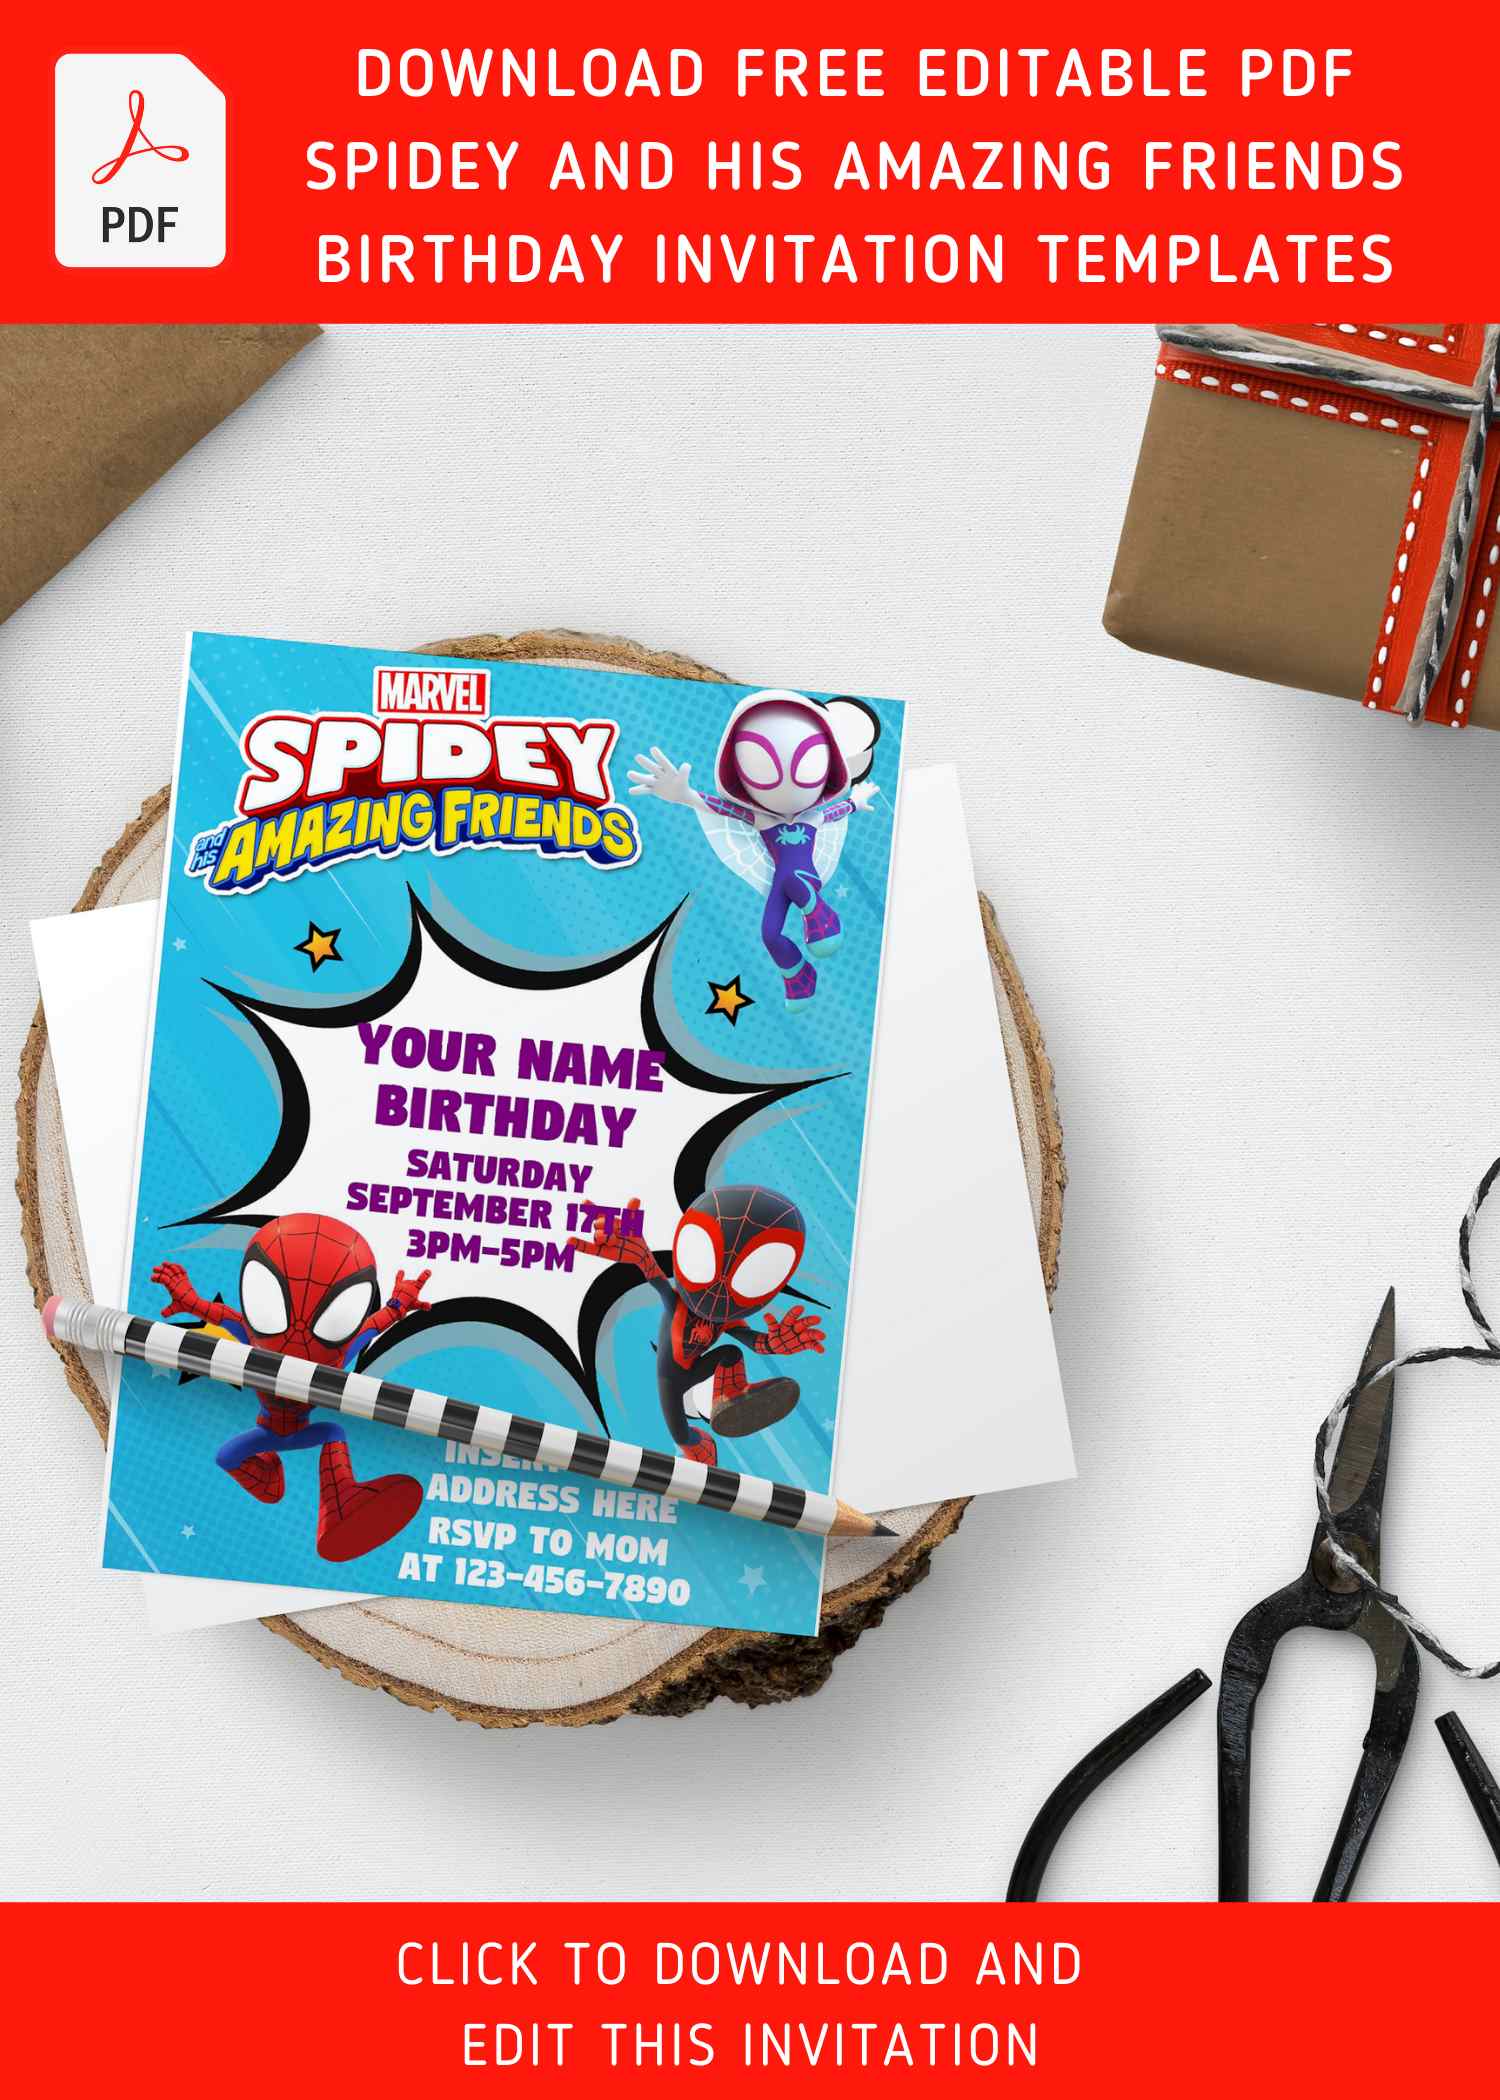 Free Editable PDF Awesome Spidey And His Amazing Friends Birthday